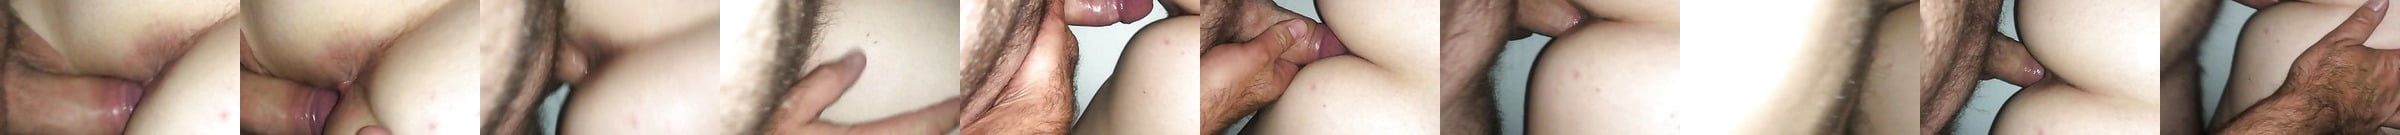 Wife Pussy Rubbed In Sheer Panties Free Porn 8c Xhamster Xhamster